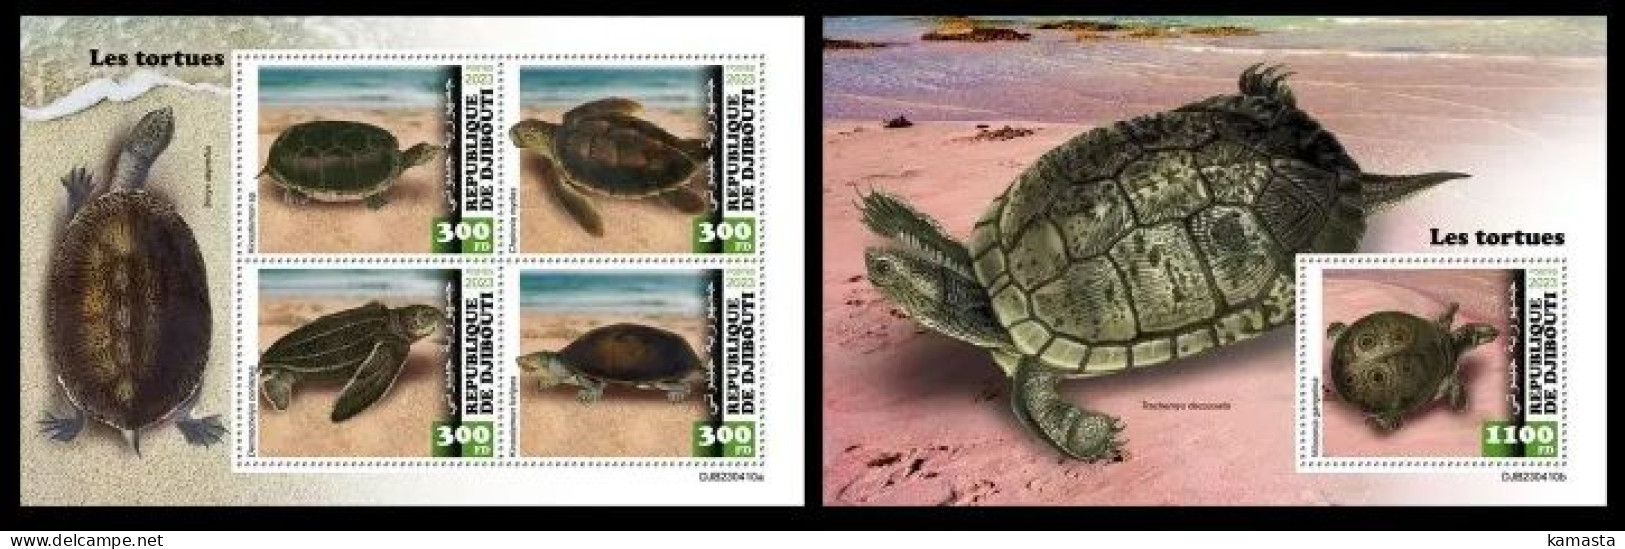 Djibouti 2023 Turtles. (410) OFFICIAL ISSUE - Tortues